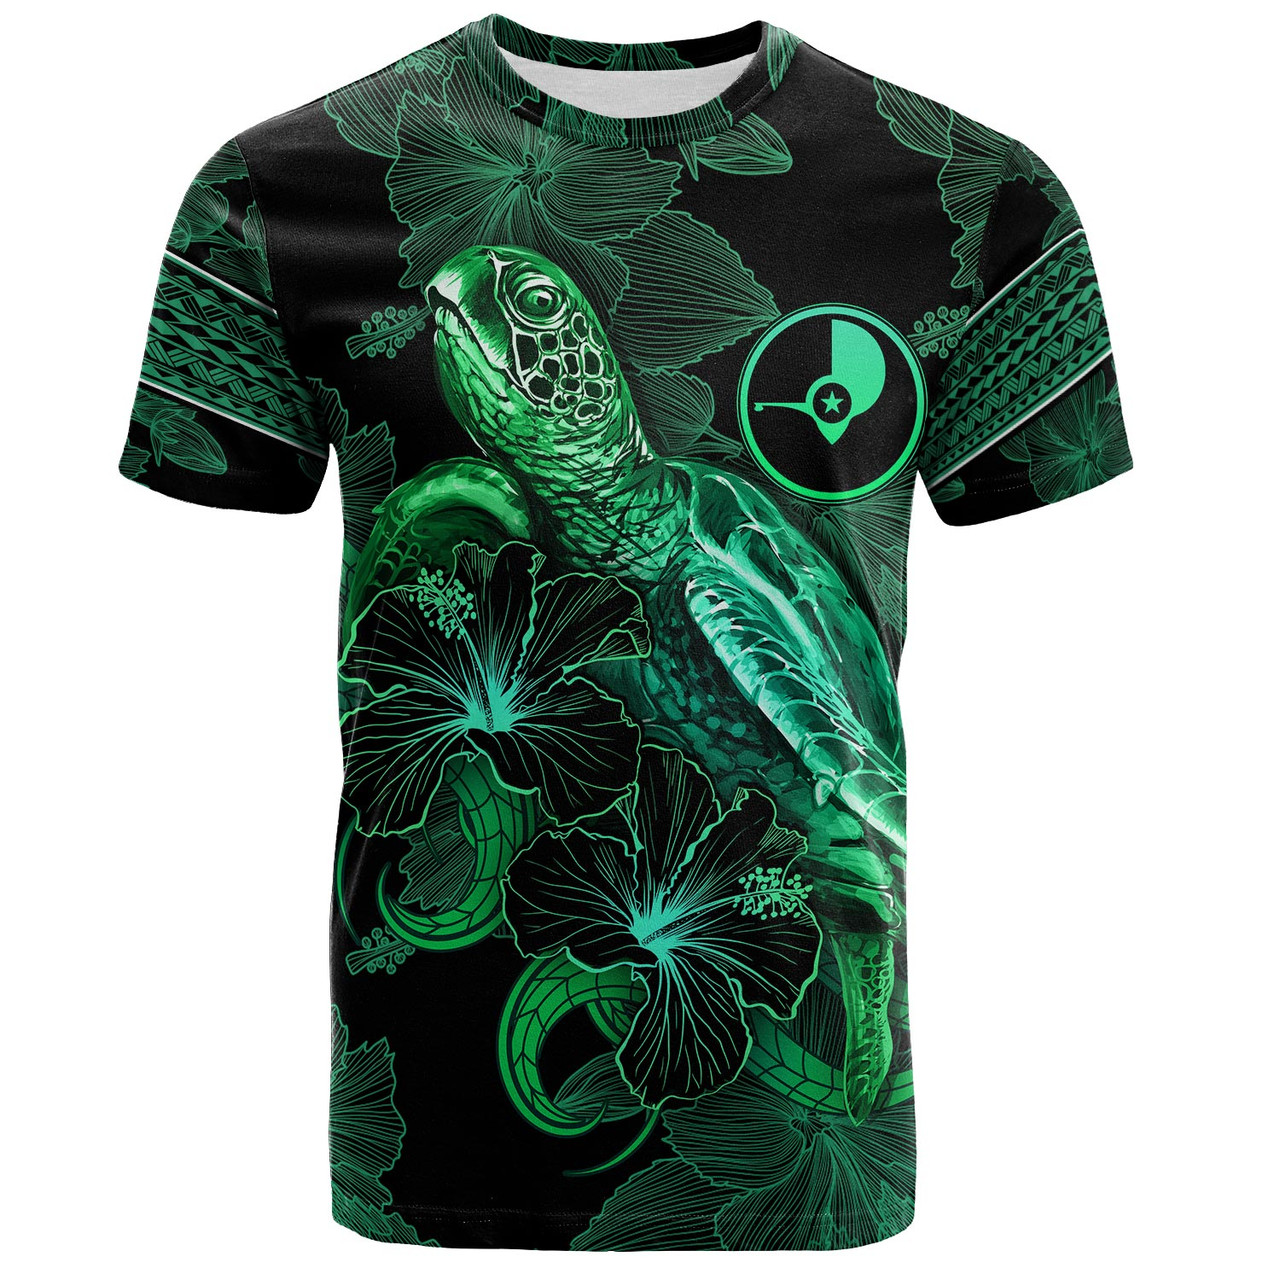 Yap State T-Shirt  Sea Turtle With Blooming Hibiscus Flowers Tribal Green